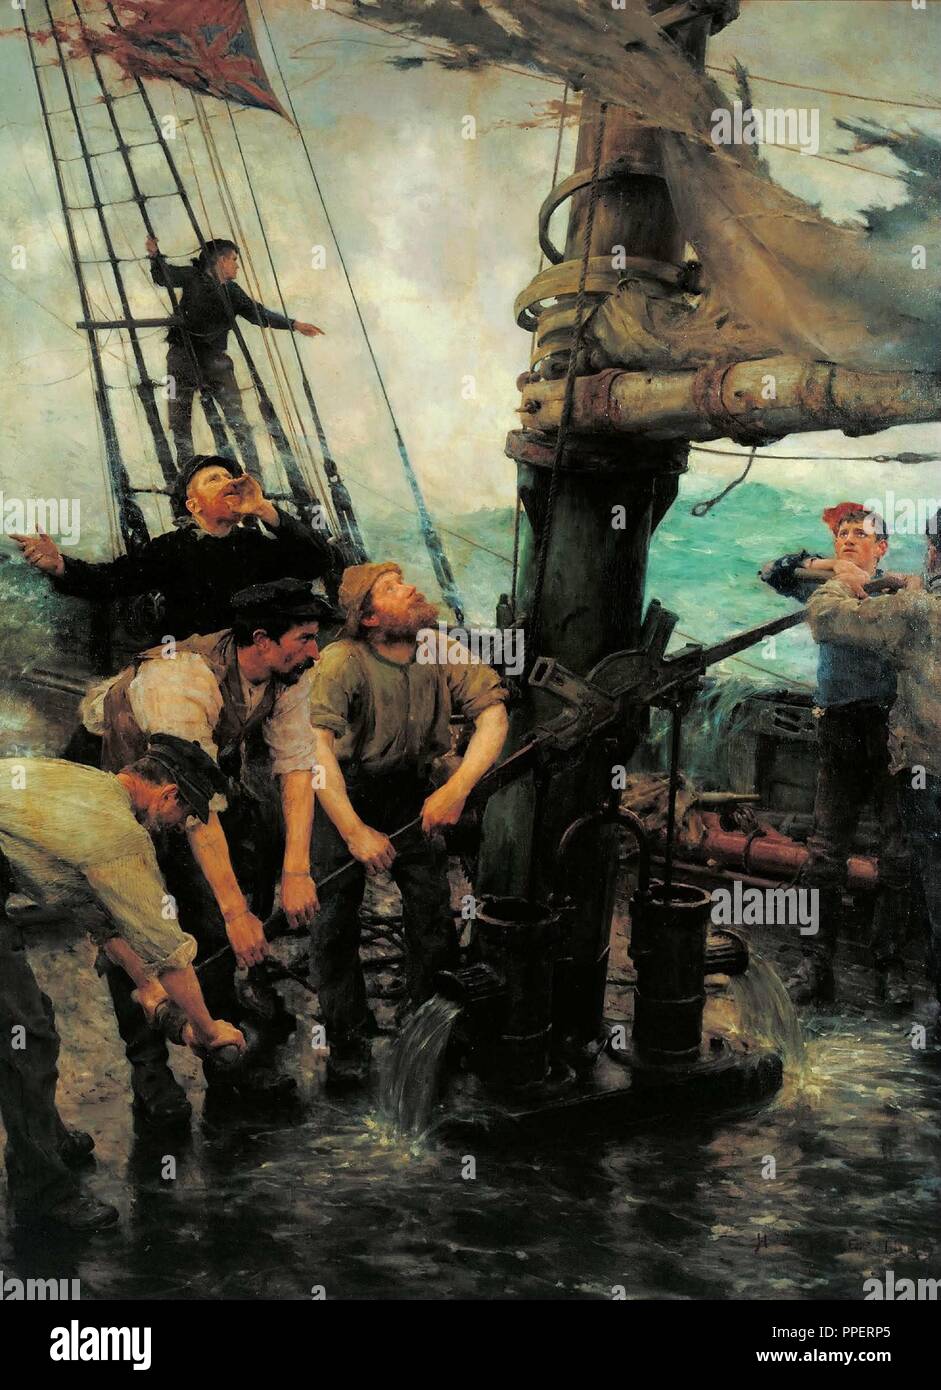 All Hands to the Pumps. Date/Period: 1888-89. Painting. Oil on canvas. Height: 185.4 cm (72.9 in); Width: 139.7 cm (55 in). Author: Henry Scott Tuke. TUKE, HENRY SCOTT. Stock Photo